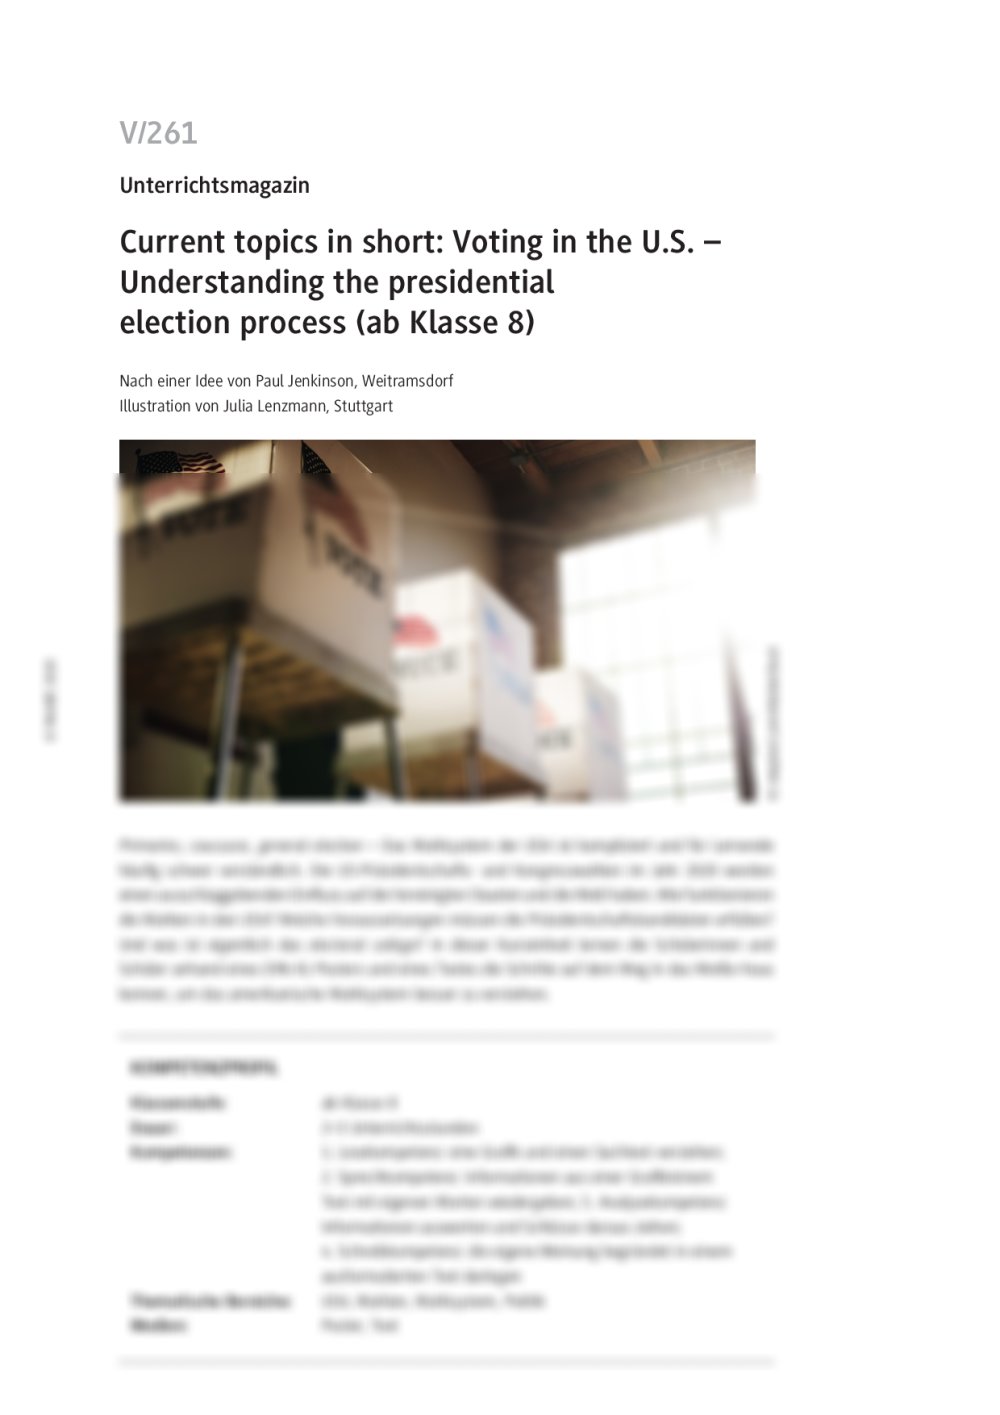 Current topics in short: Voting in the U.S. - Seite 1